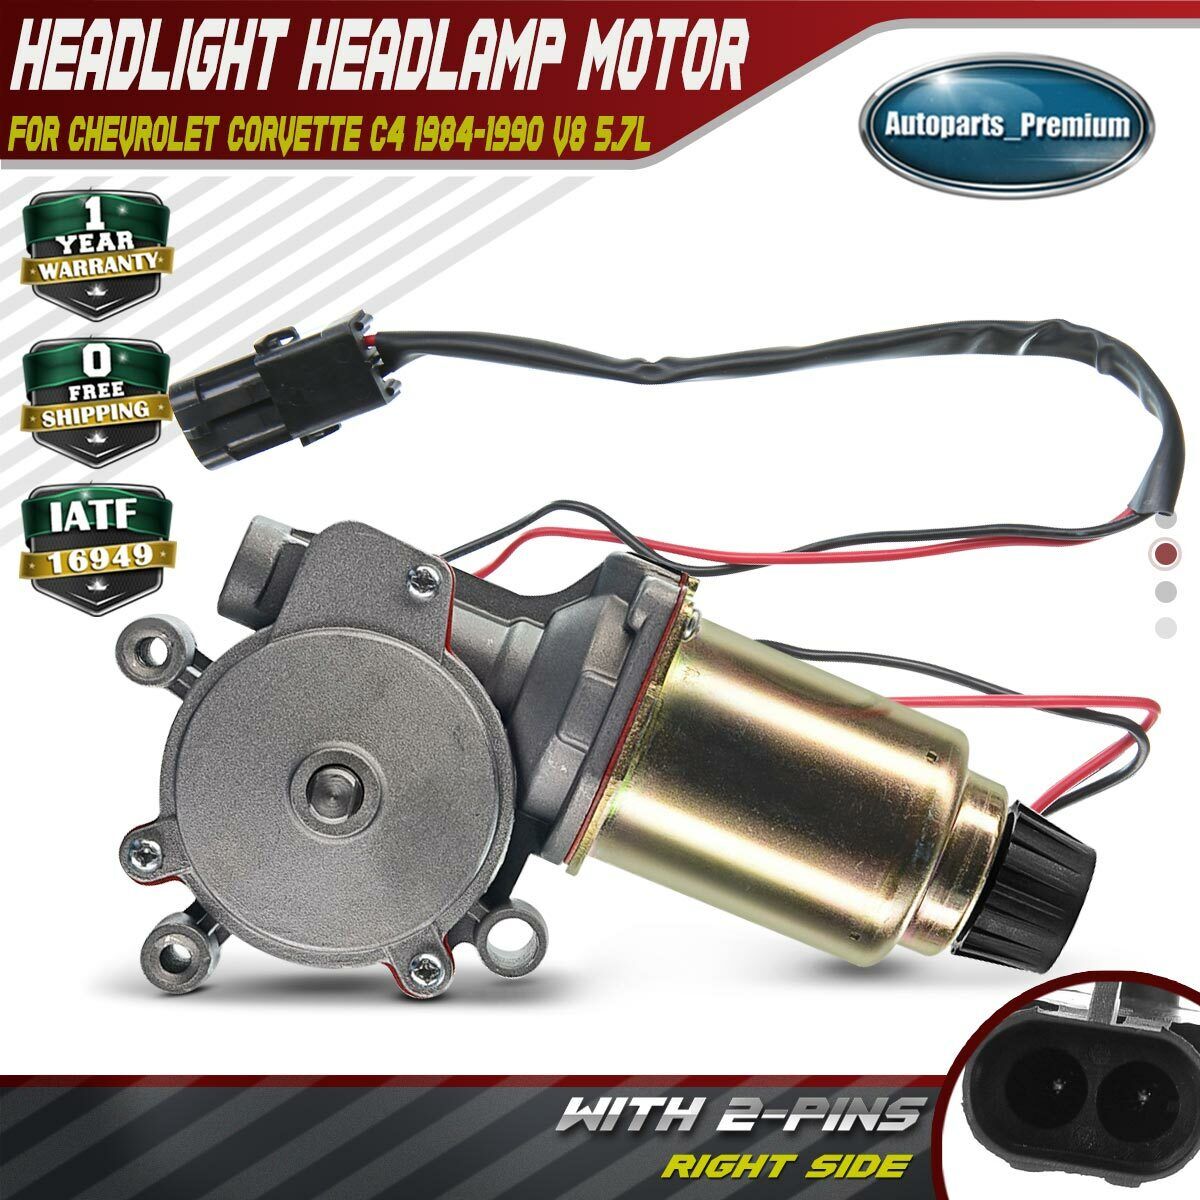 Right Headlight Headlamp Motor 2 Wires for Chevy Corvette C4 1984-1990 2 Pins